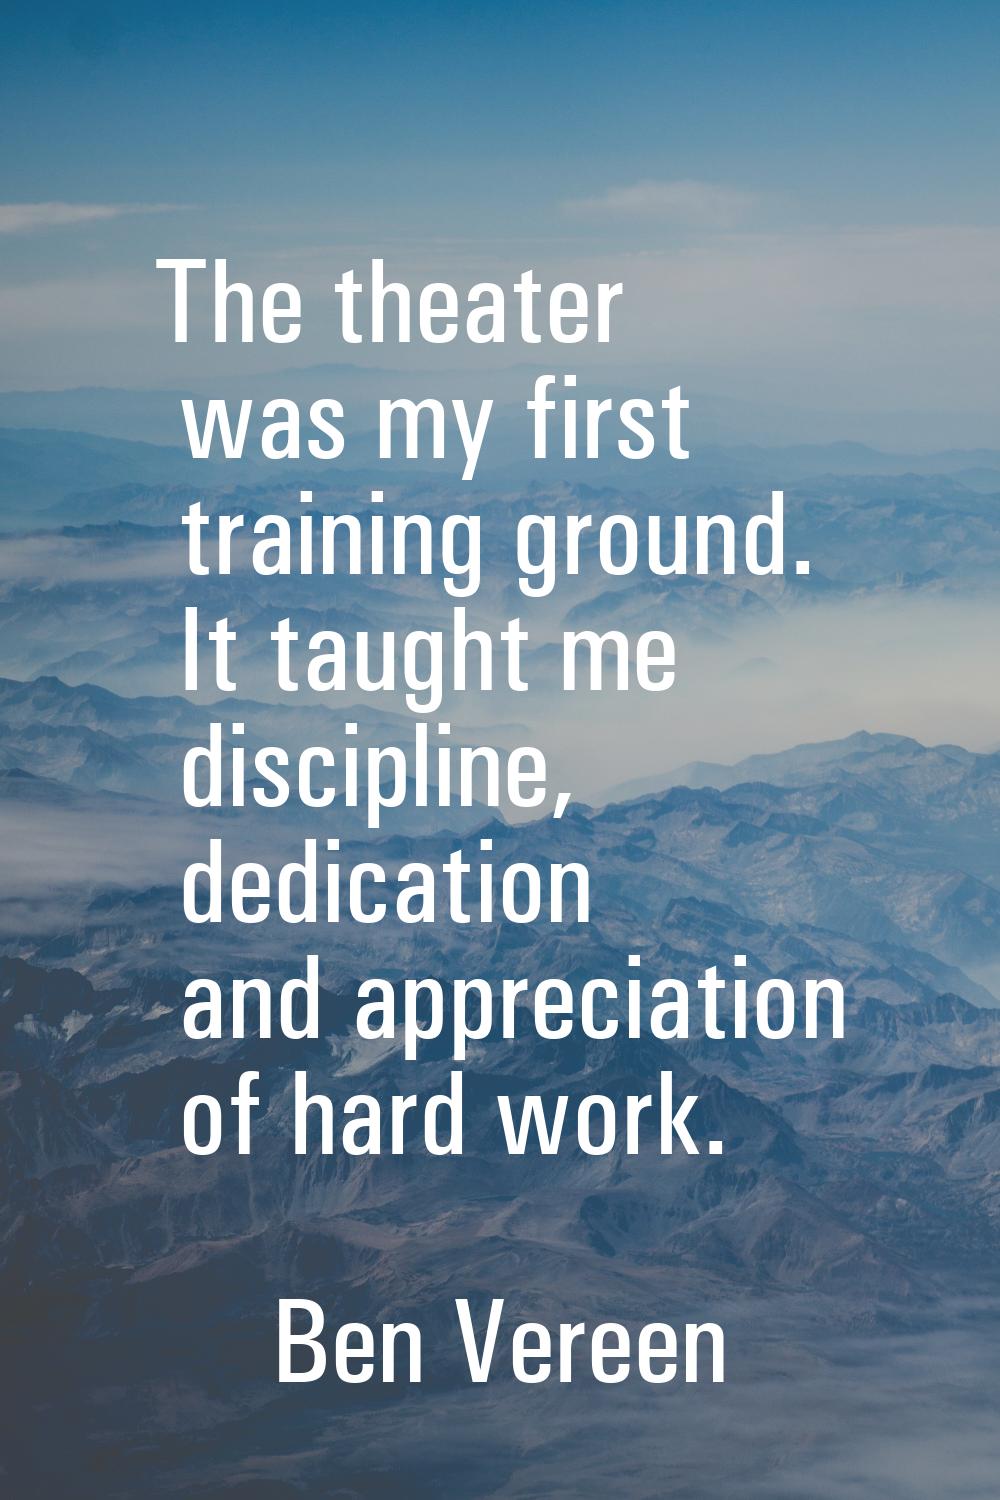 The theater was my first training ground. It taught me discipline, dedication and appreciation of h